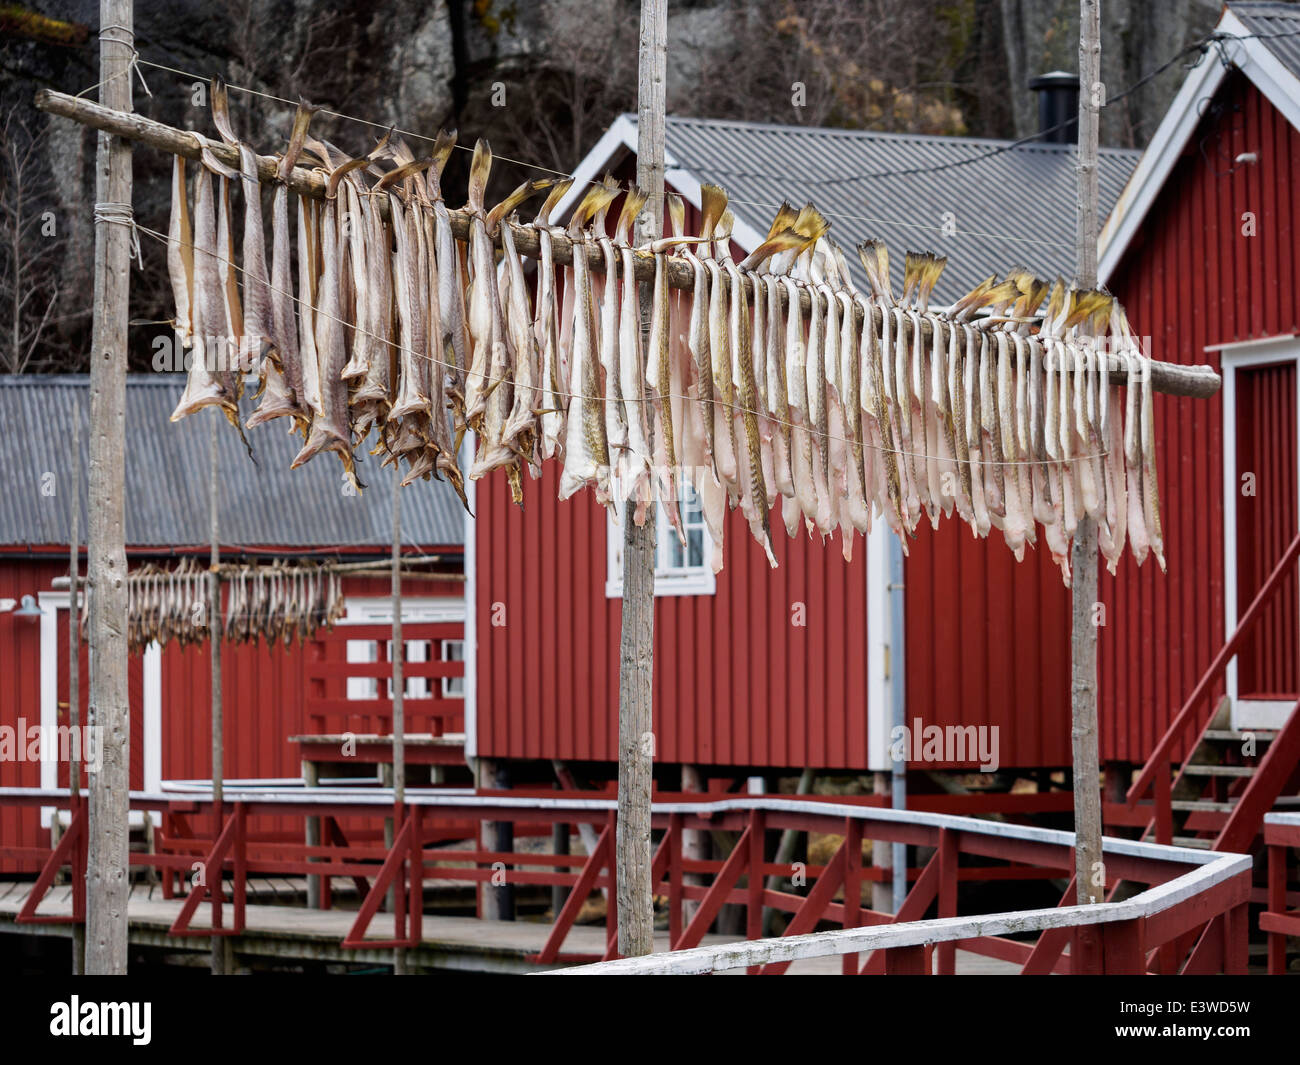 Stockfish (cod) is hung up to dry in Nusfjord on the Lofoten islands in Norway. Stock Photo